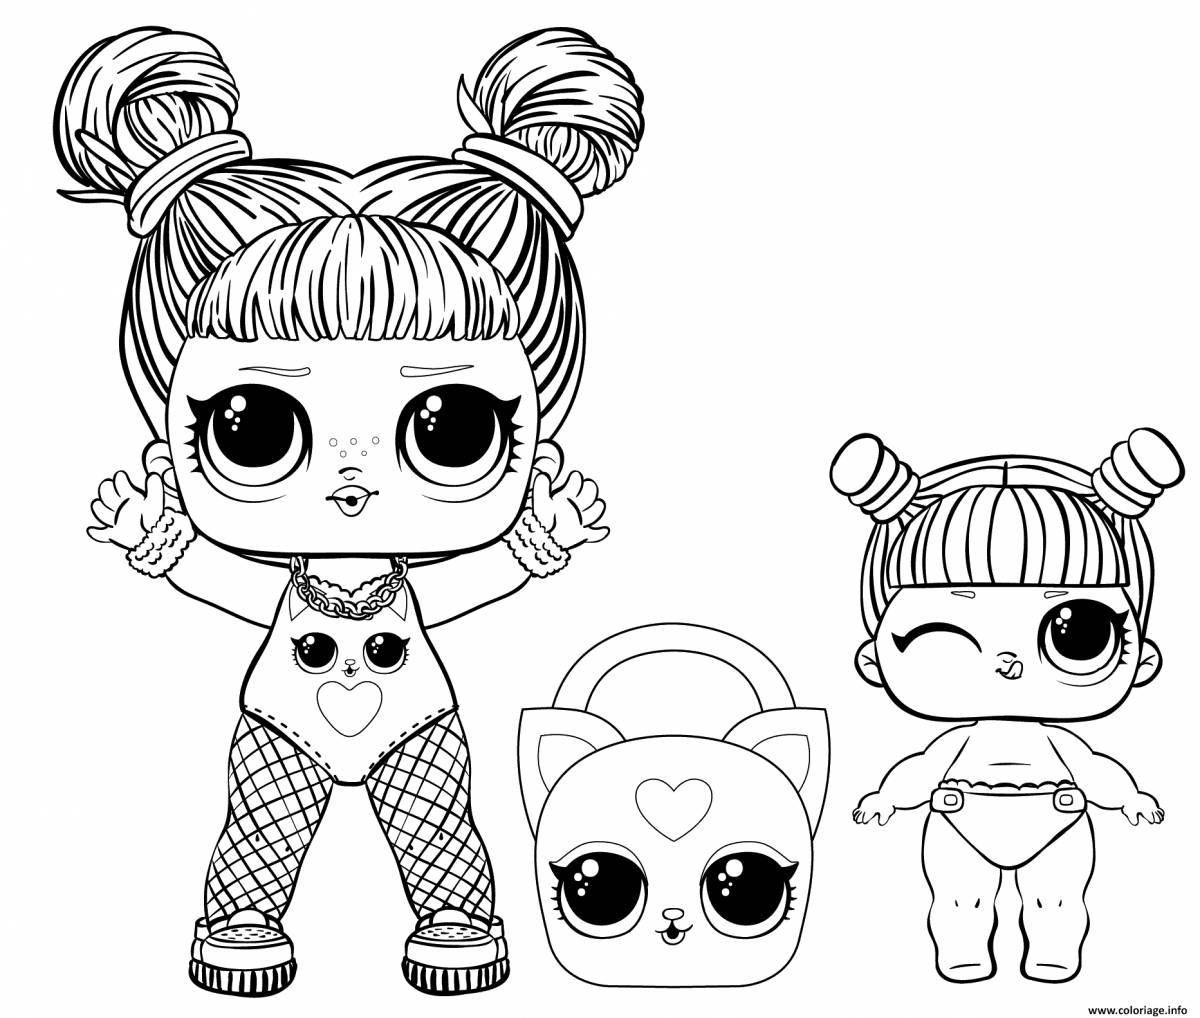 Lovely lowe doll coloring book for kids